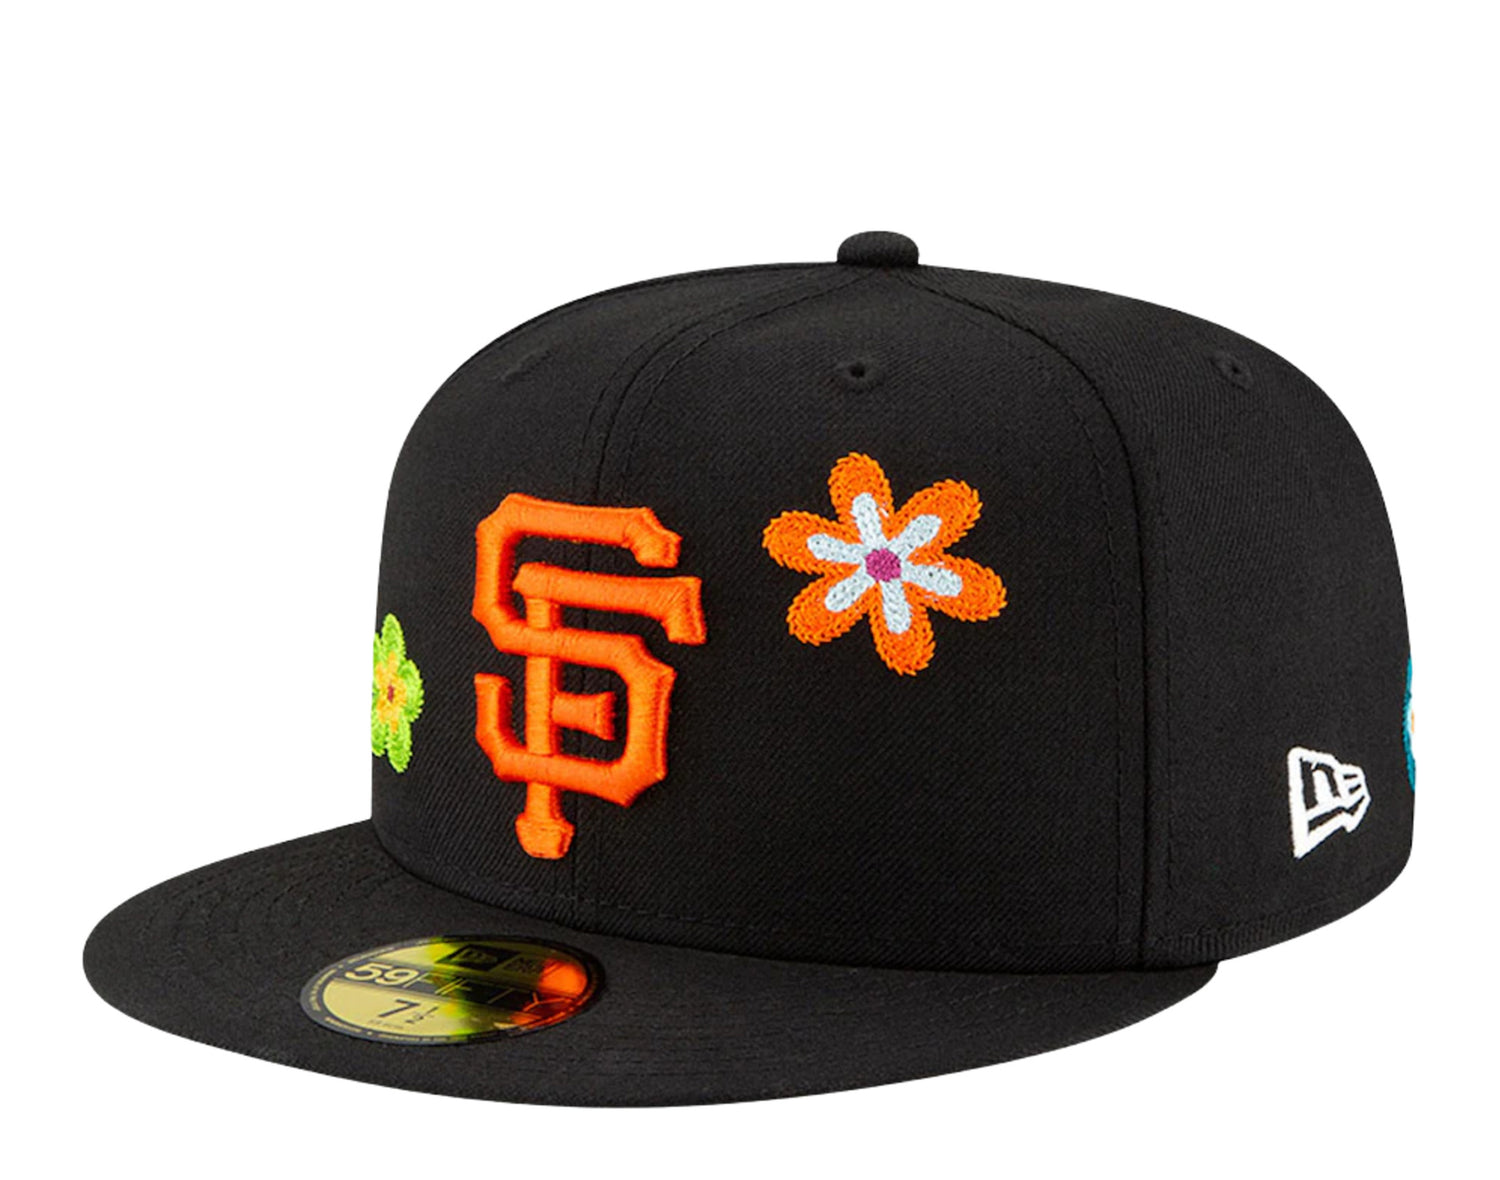 New Era - 59Fifty - Fitted Hats - Chain Stitch Floral